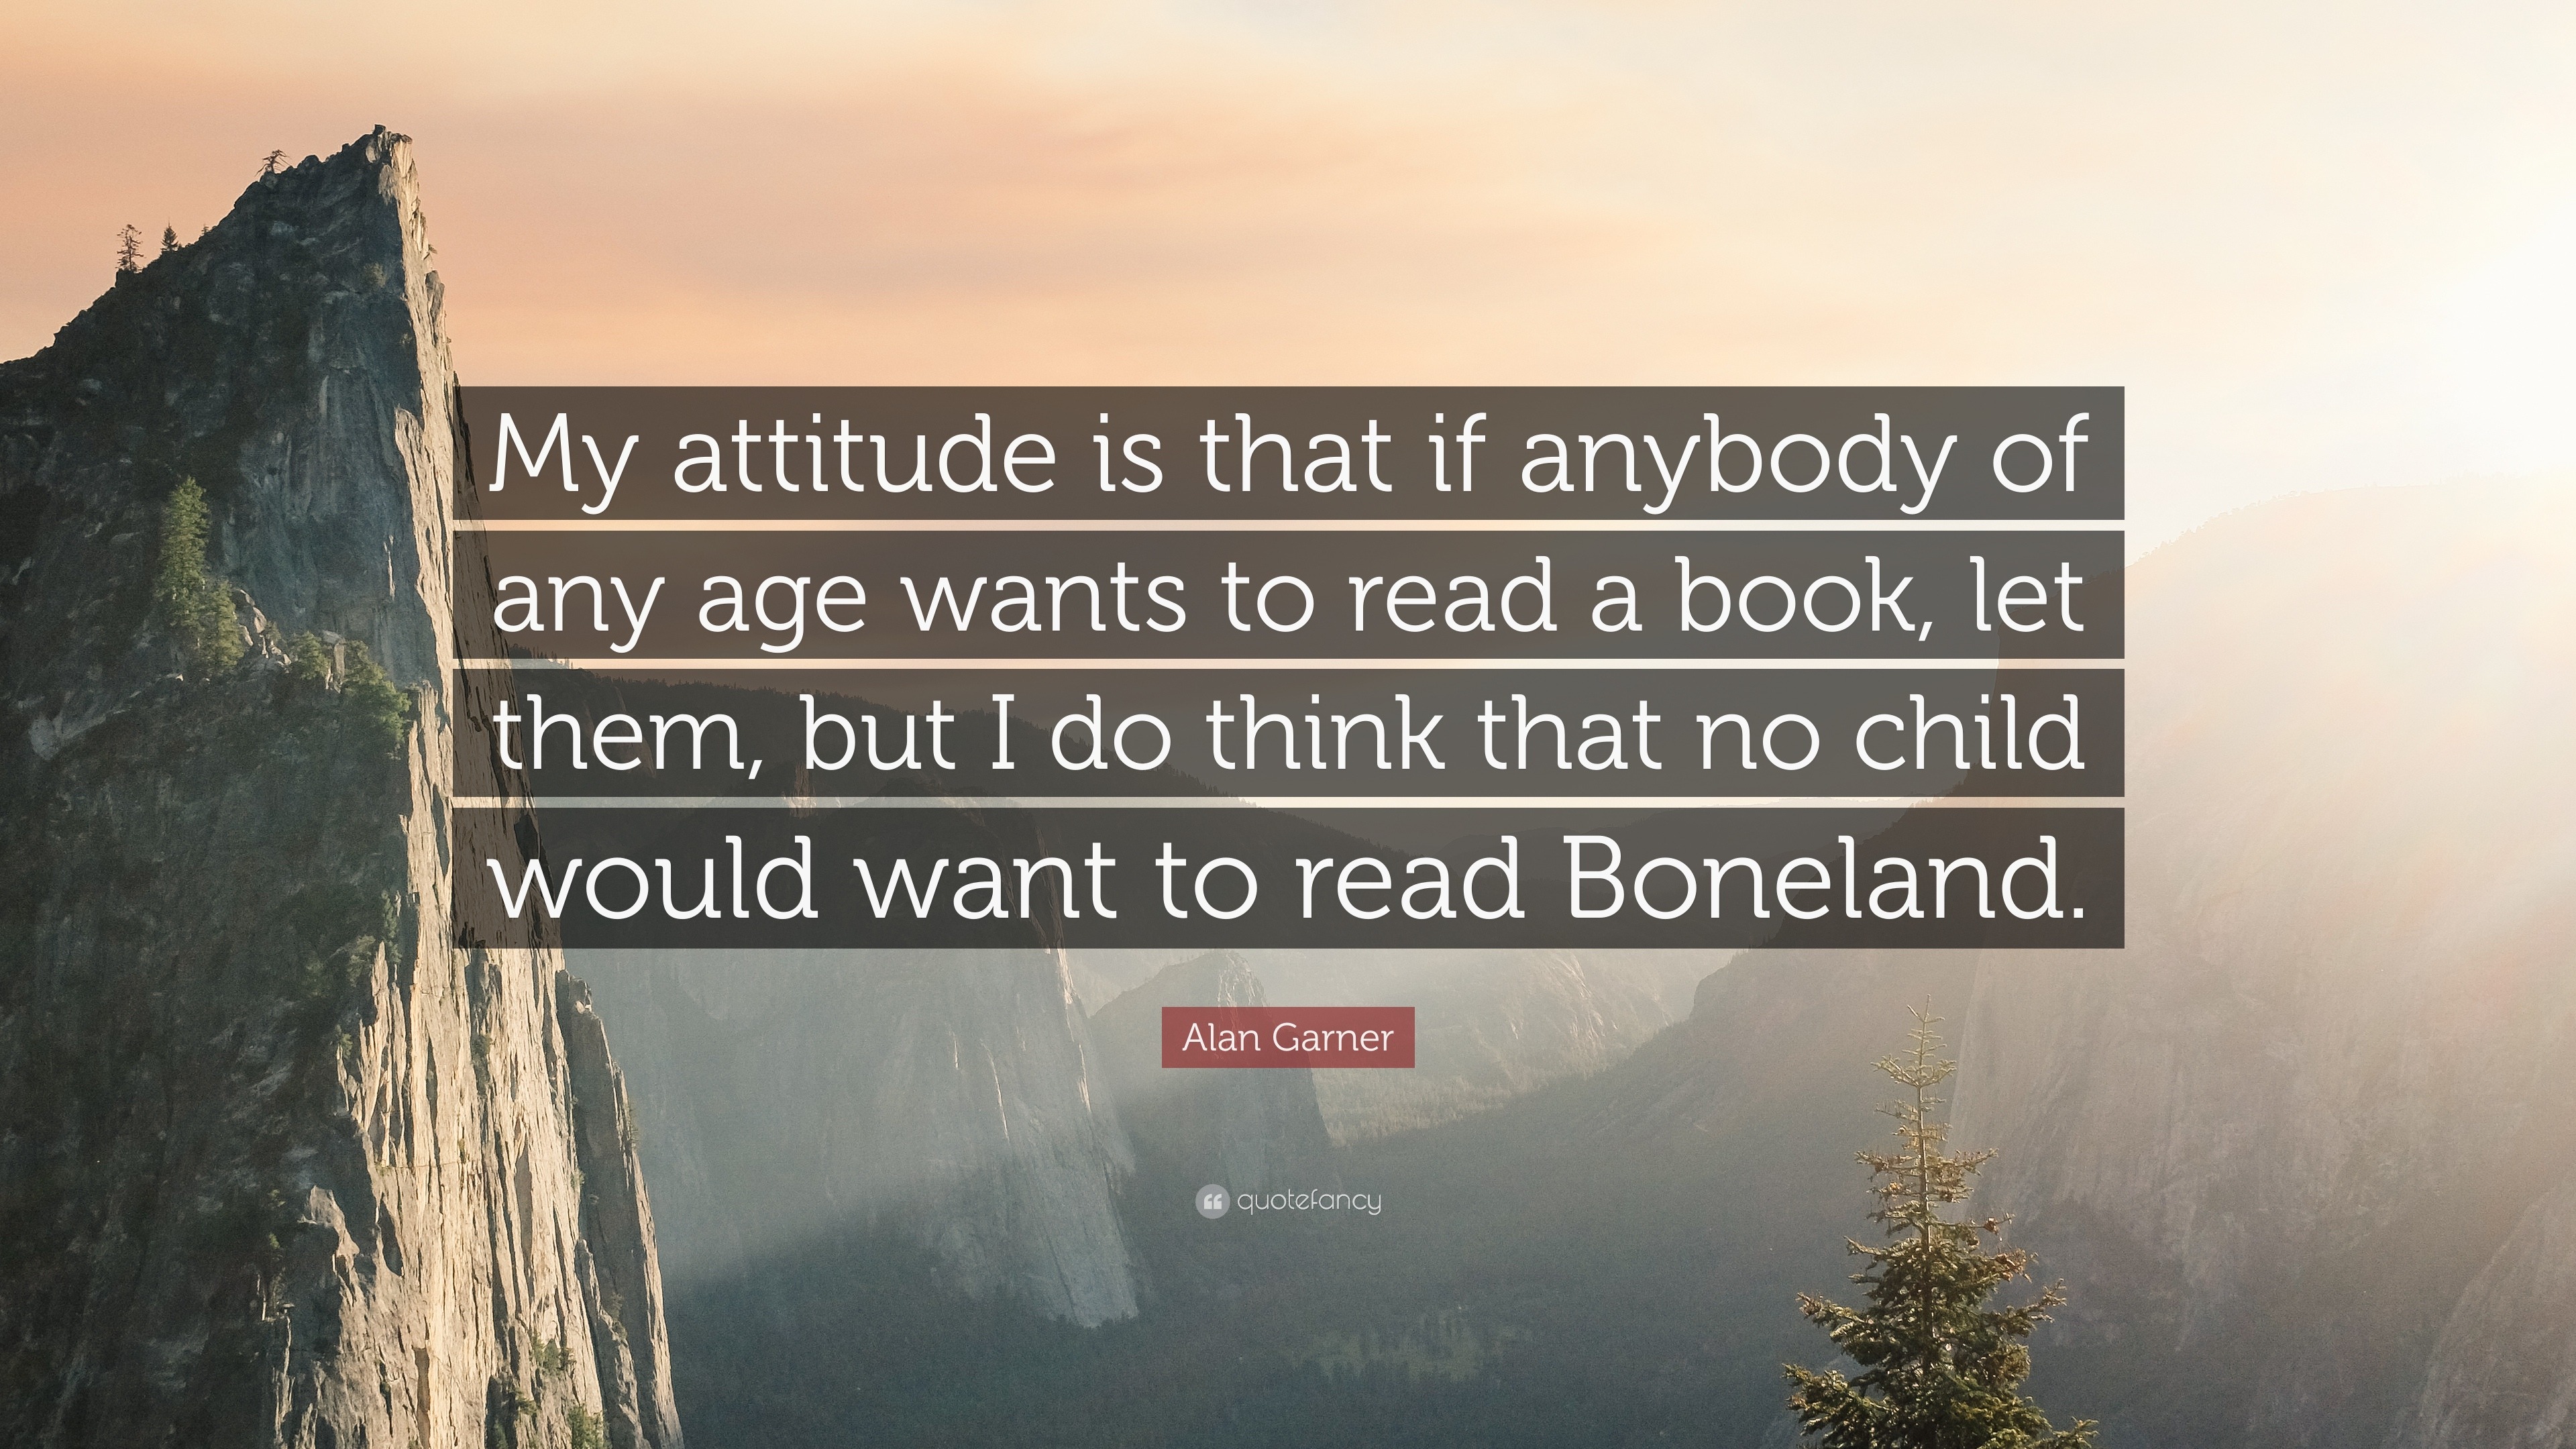 Alan Garner Quote: “My is that if anybody of age wants to read a book, let them, but I do think no child would want to